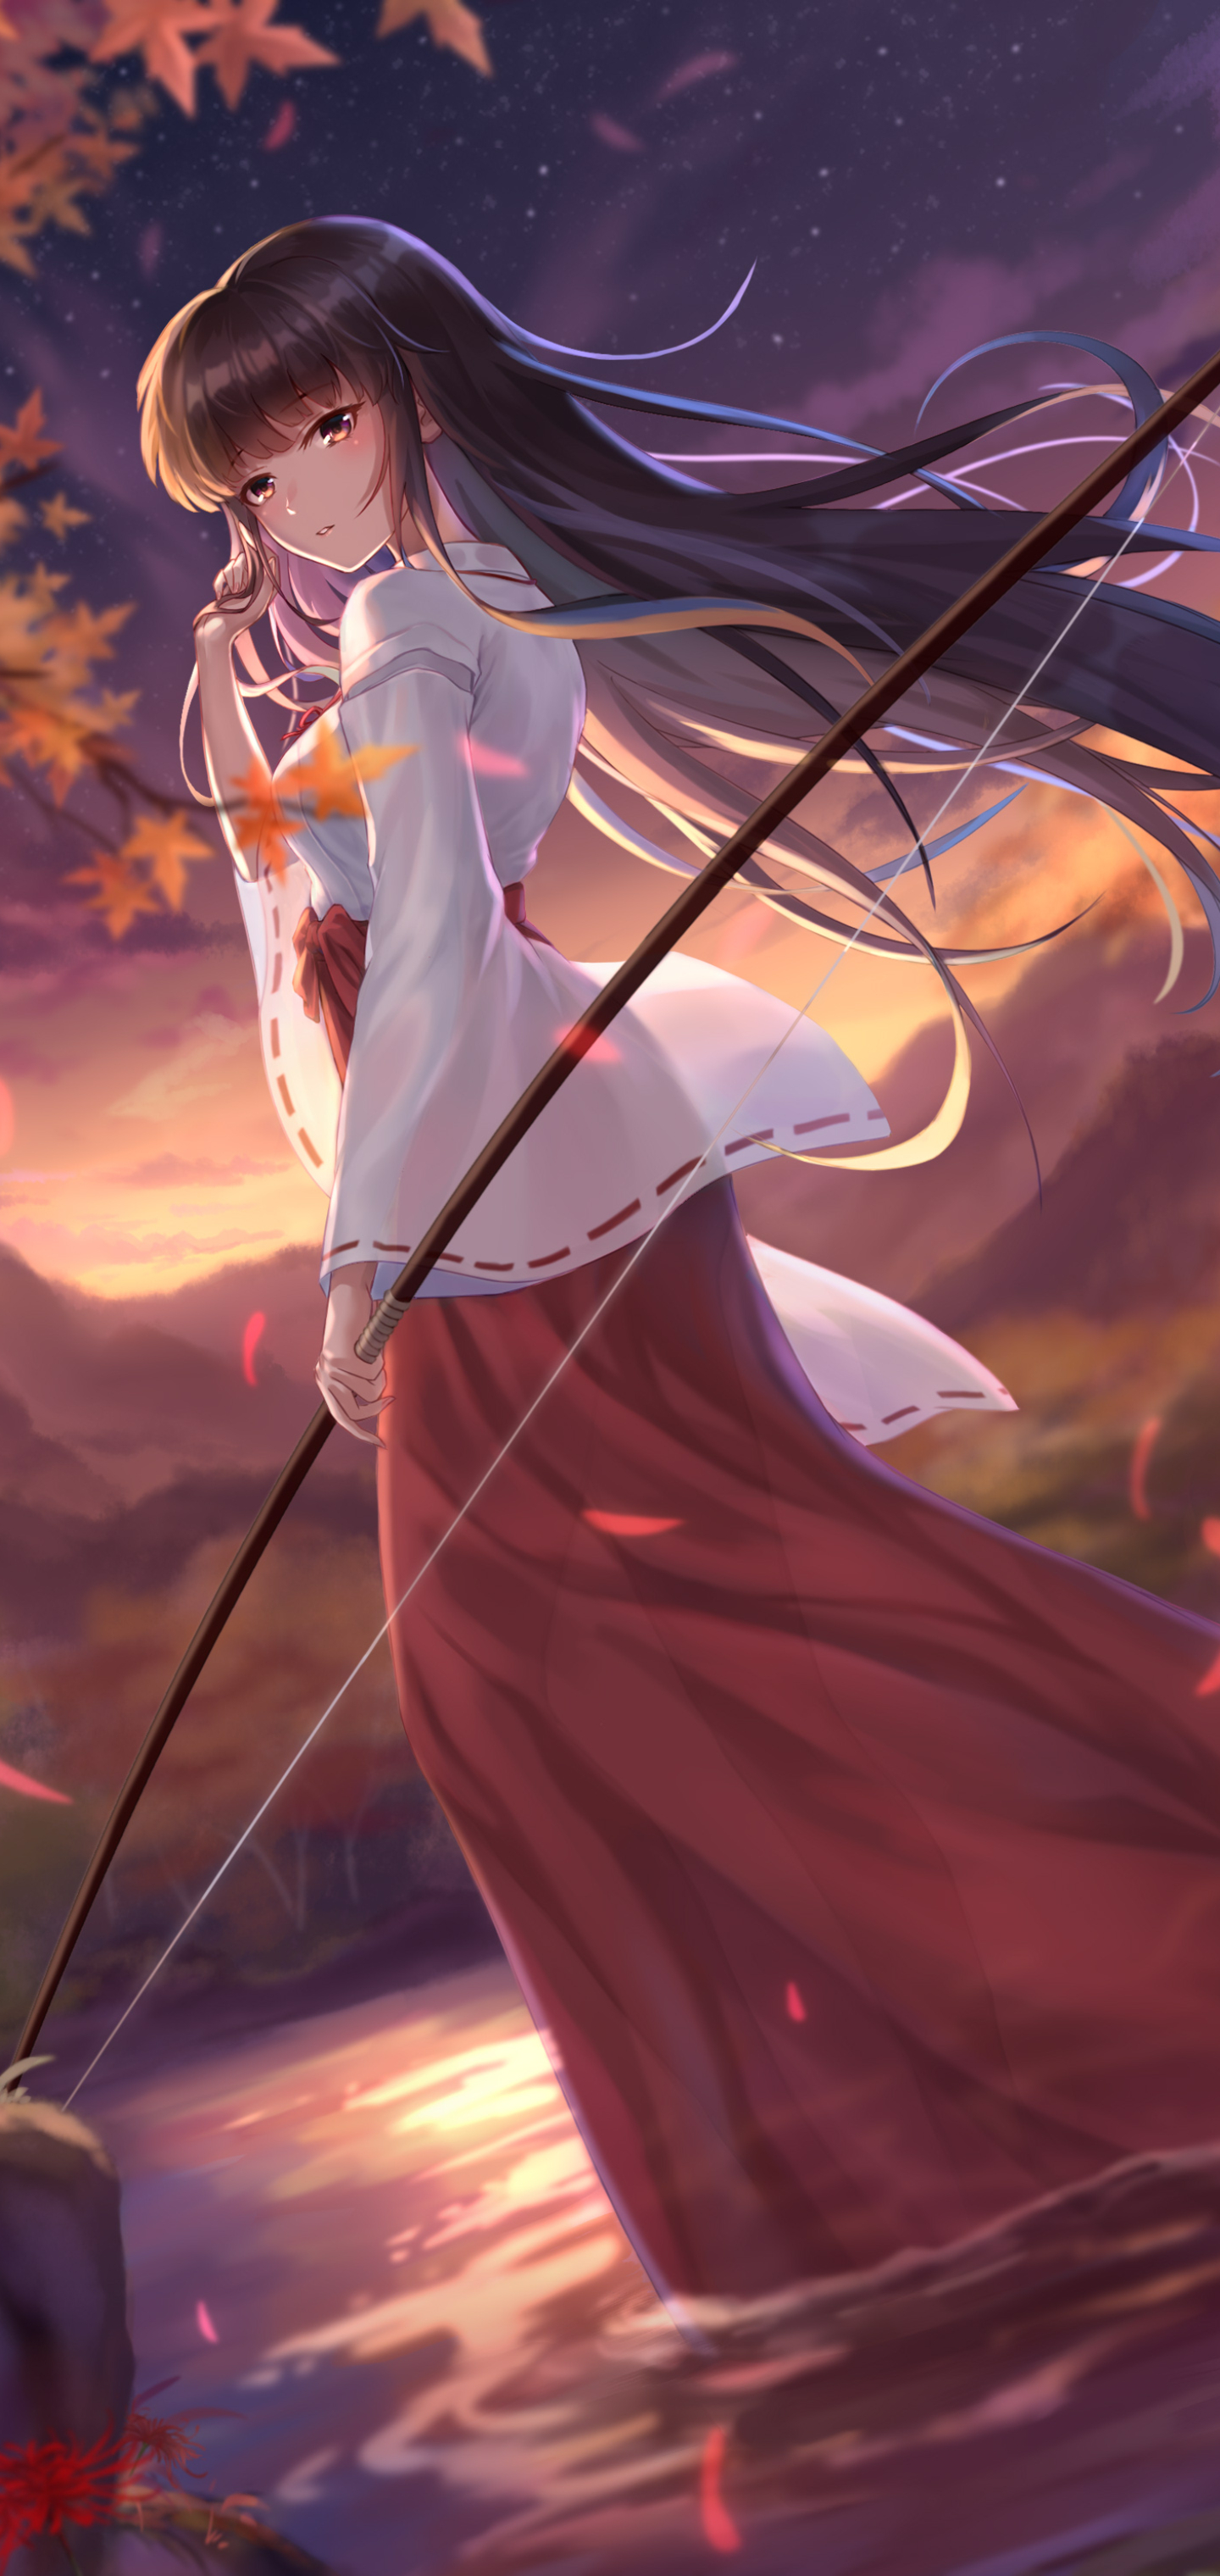 Mobile wallpaper: Anime, Inuyasha, Kikyô (Inuyasha), 1373550 download the  picture for free.